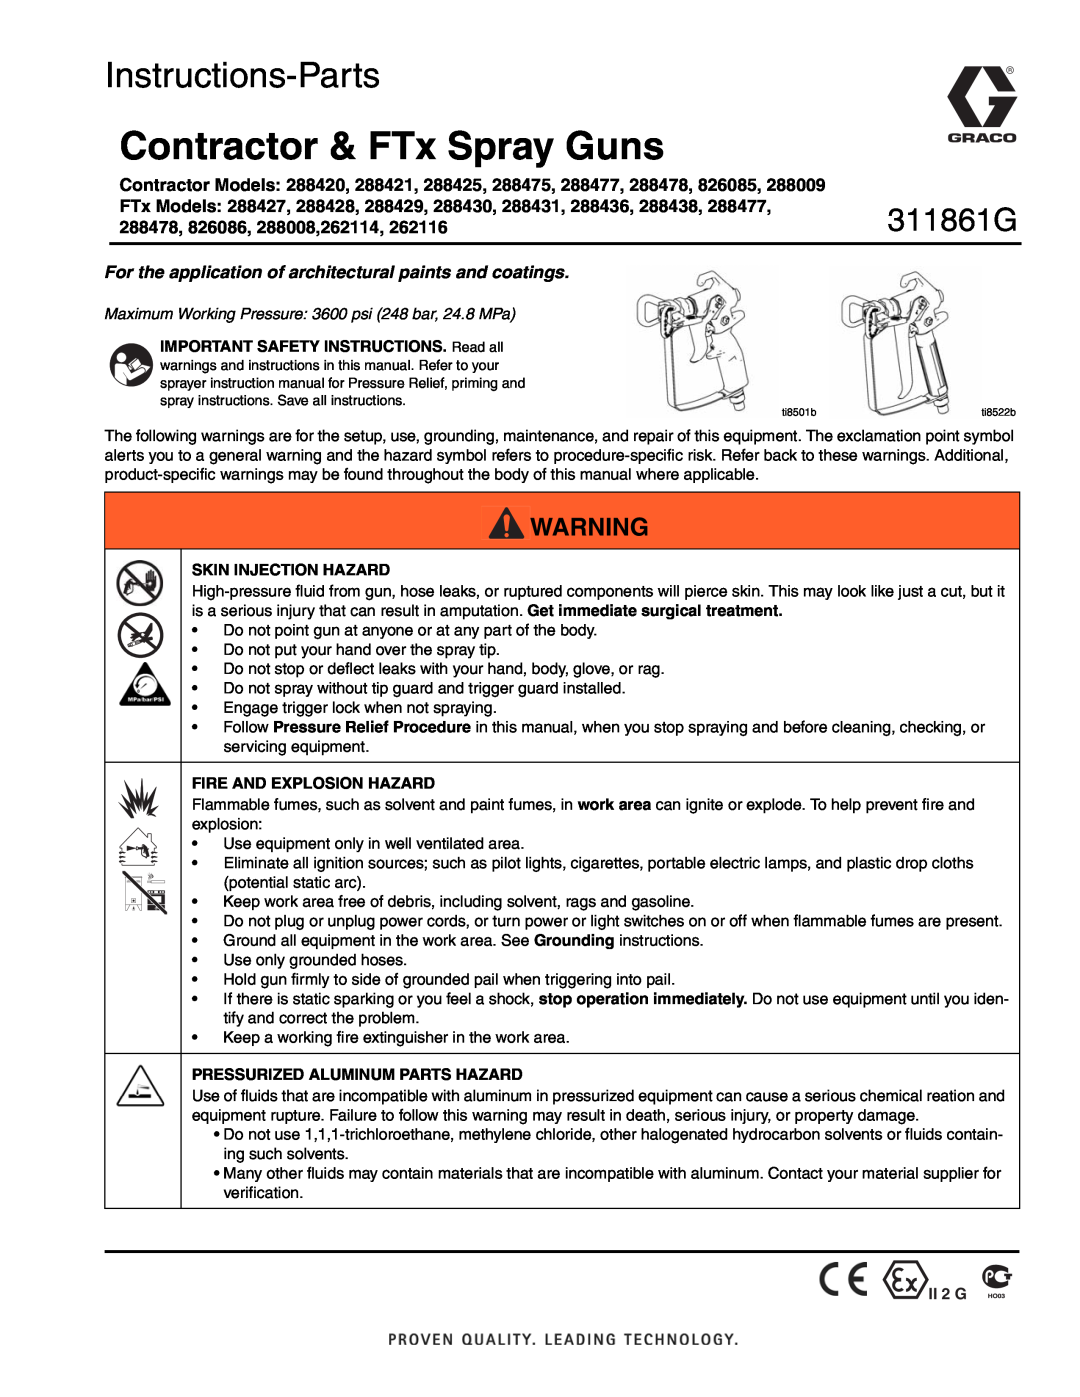 Graco Inc important safety instructions FTx Models 288427, 288428, 288429, 288430, 288431, 288436, 288438, 311861G 